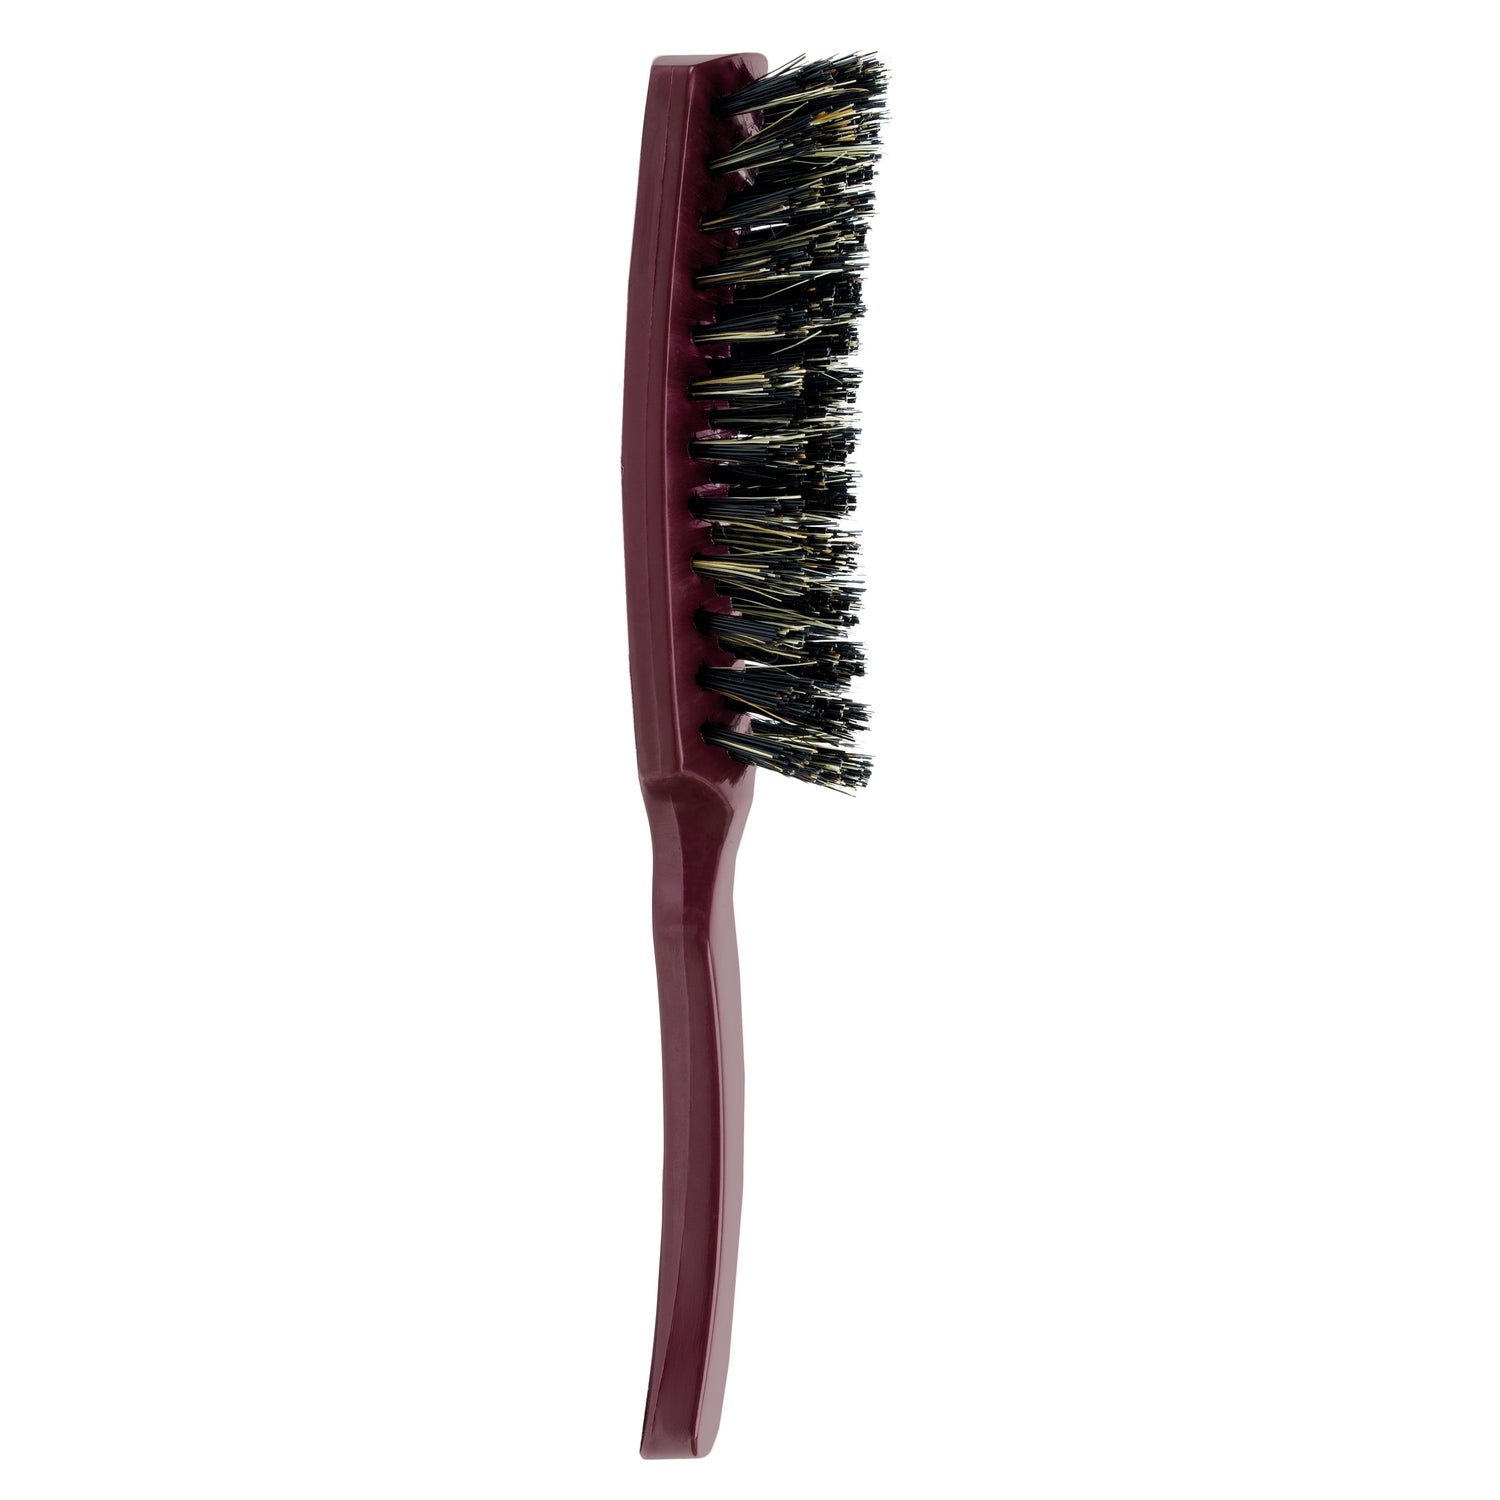 https://fuller.com/cdn/shop/products/nylon-and-boar-bristle-professional-styling-hairbrush-for-all-hair-types-mulberry-color-hair-brushes-3_1500x1500.jpg?v=1596017227